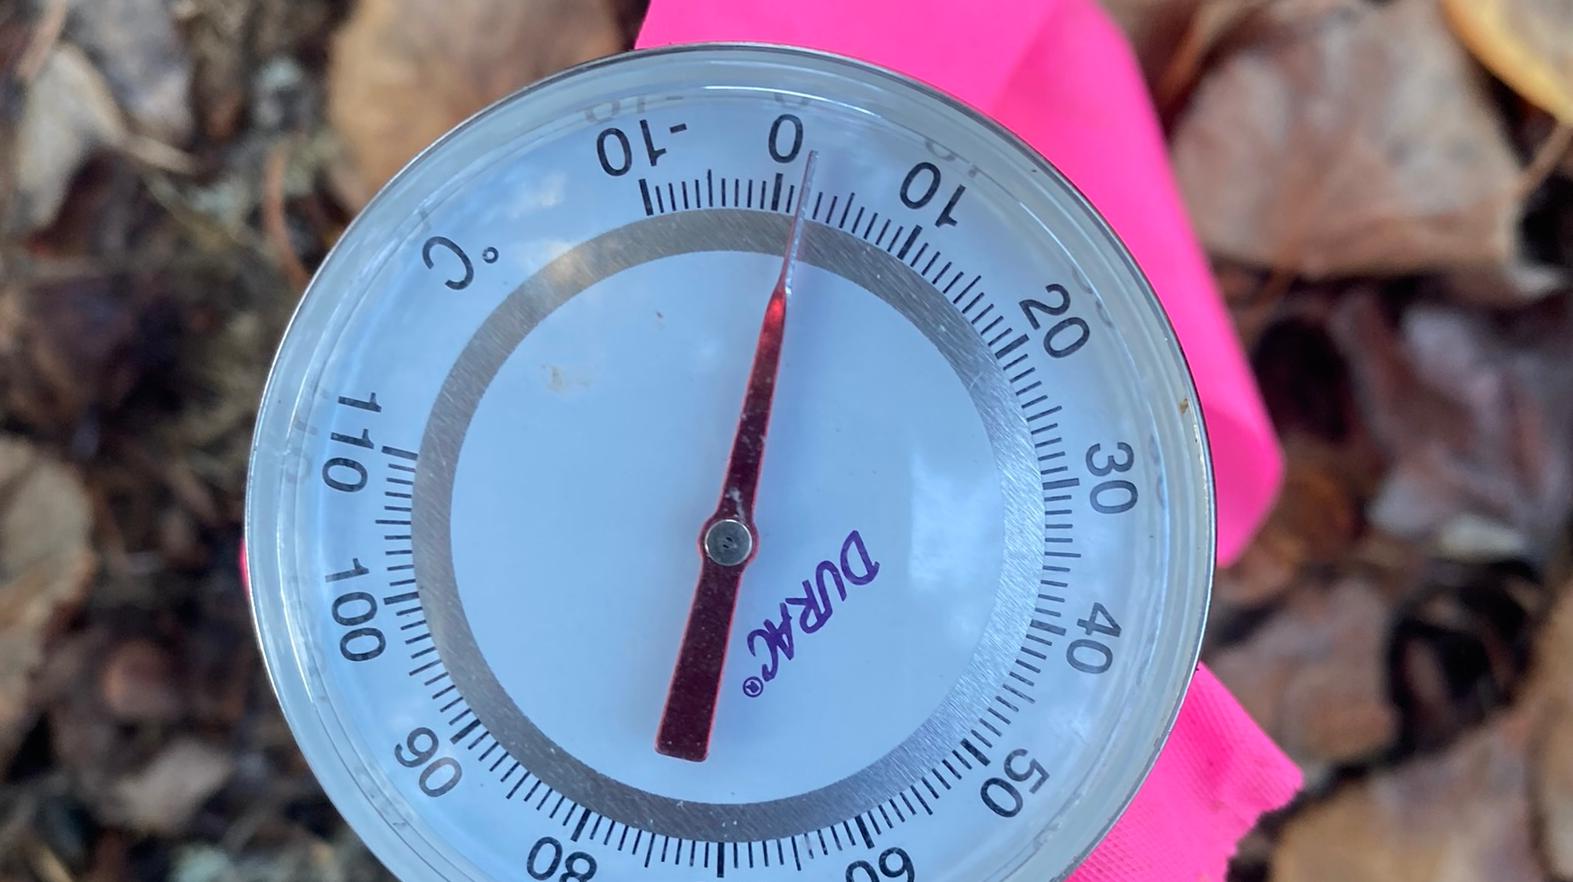 Soil thermometer that reads 2 degrees Celsius